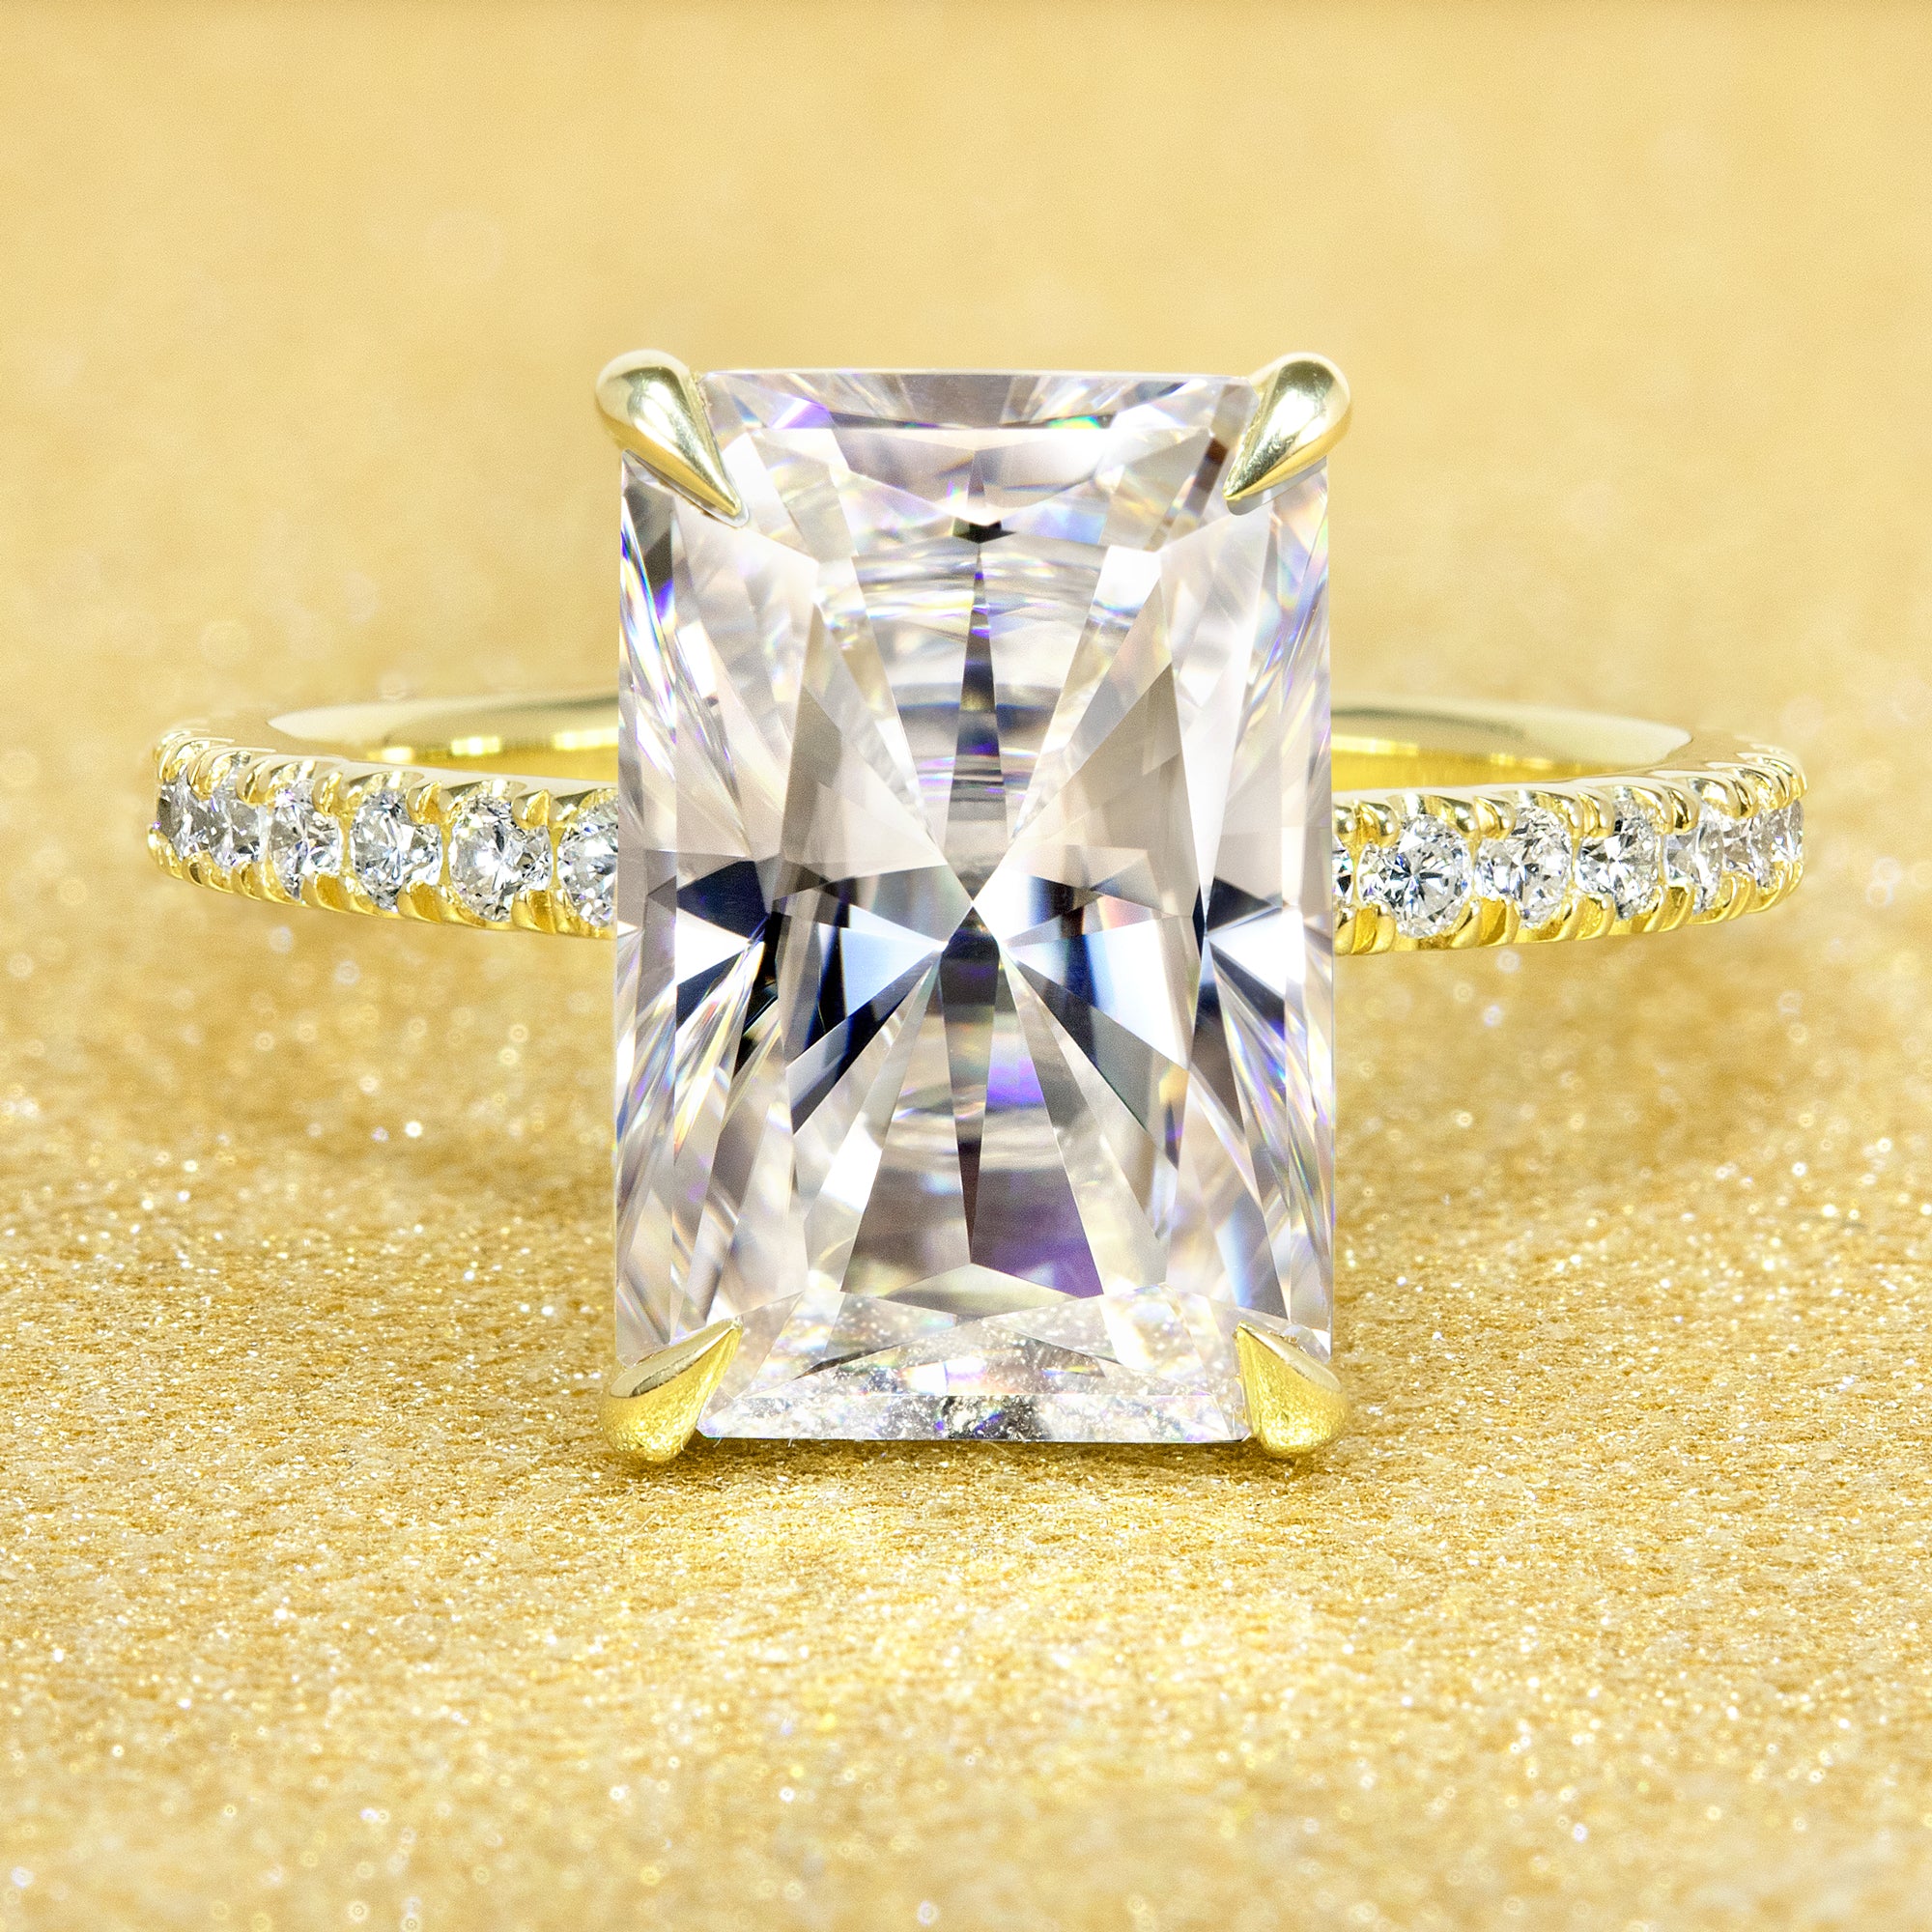 Classic Selina 4.5ct Elongated Radiant-cut Moissanite Hidden Halo Lab-grown Diamond Engagement ring in 14K gold, 18K gold, or Platinum handcrafted in Los Angeles by Earthena Jewelry.